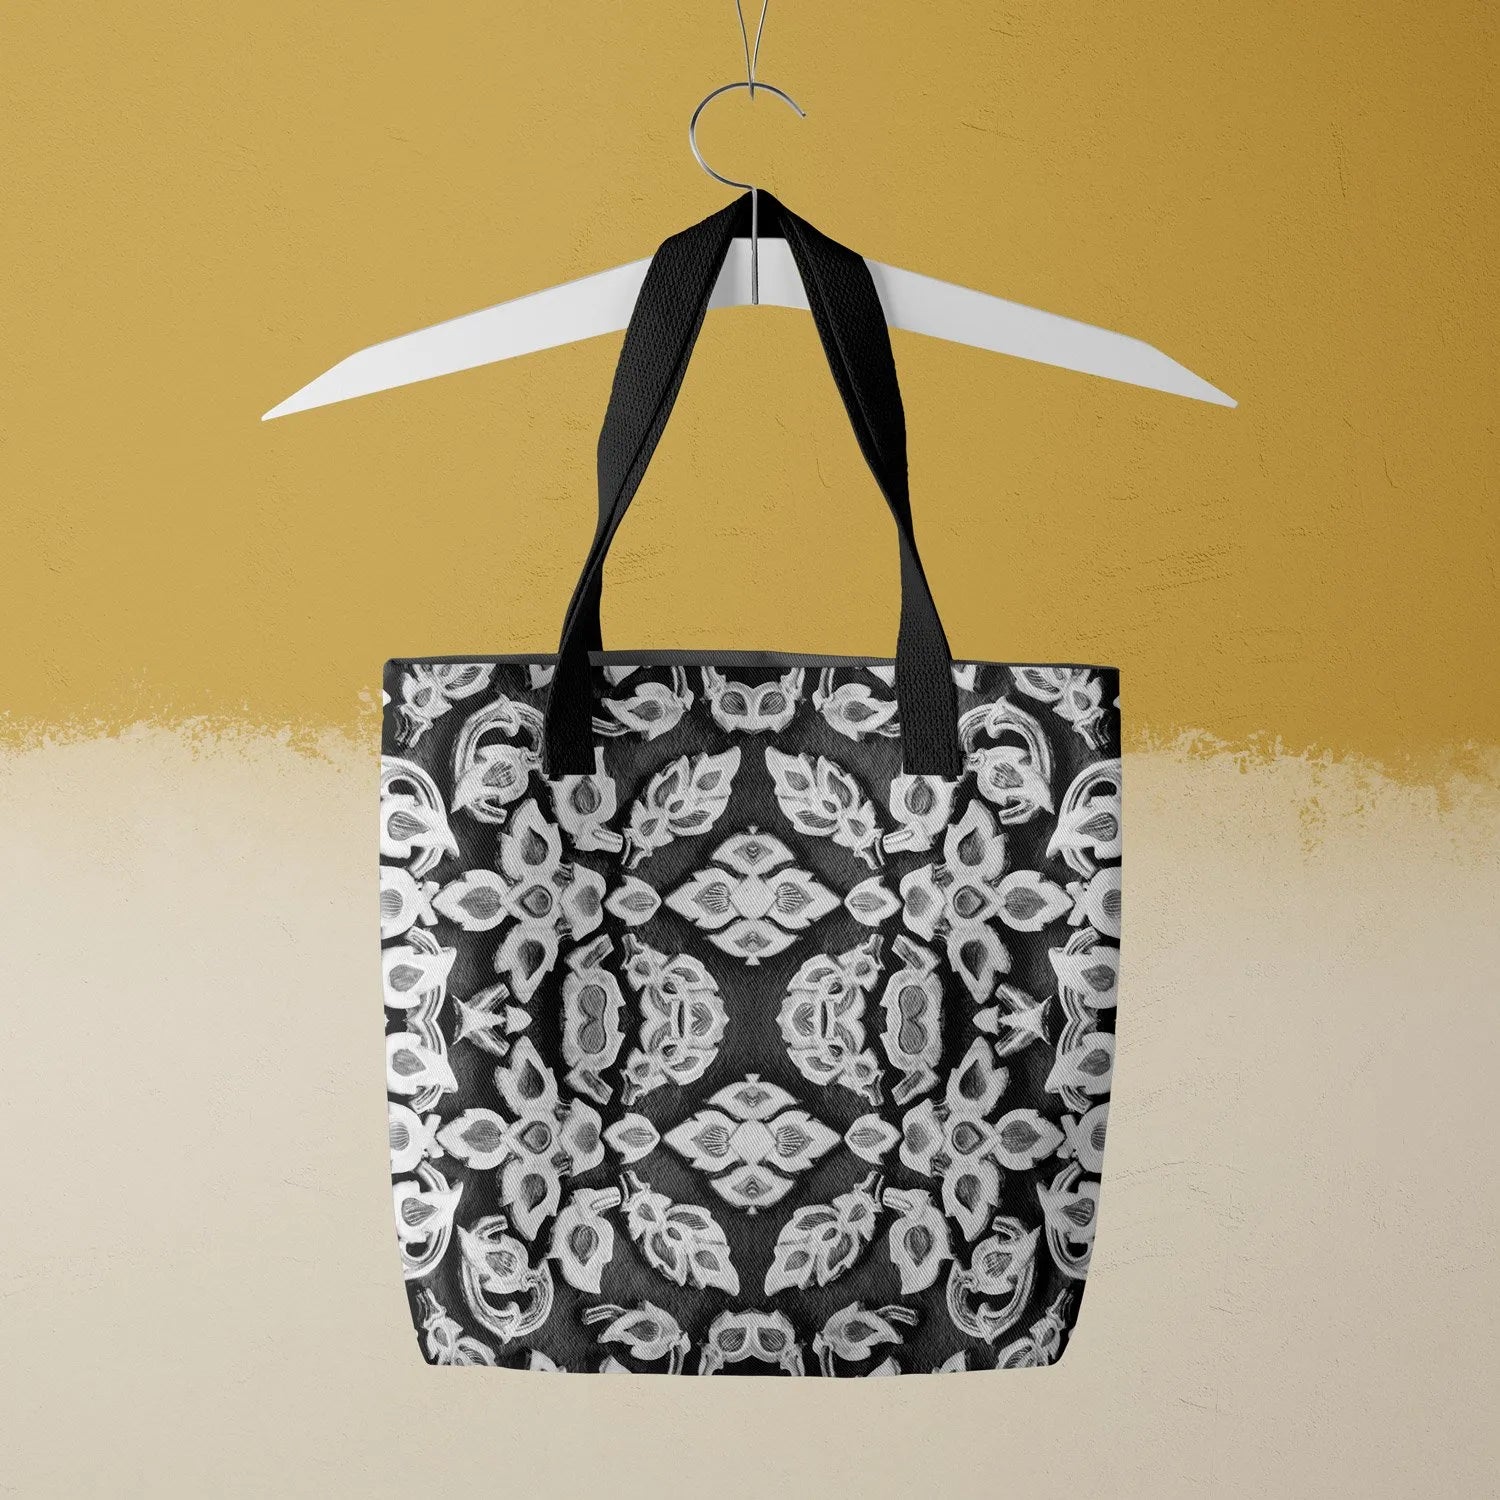 Ayodhya Tote - Black And White - Heavy Duty Reusable Grocery Bag - Black Handles - Shopping Totes - Aesthetic Art